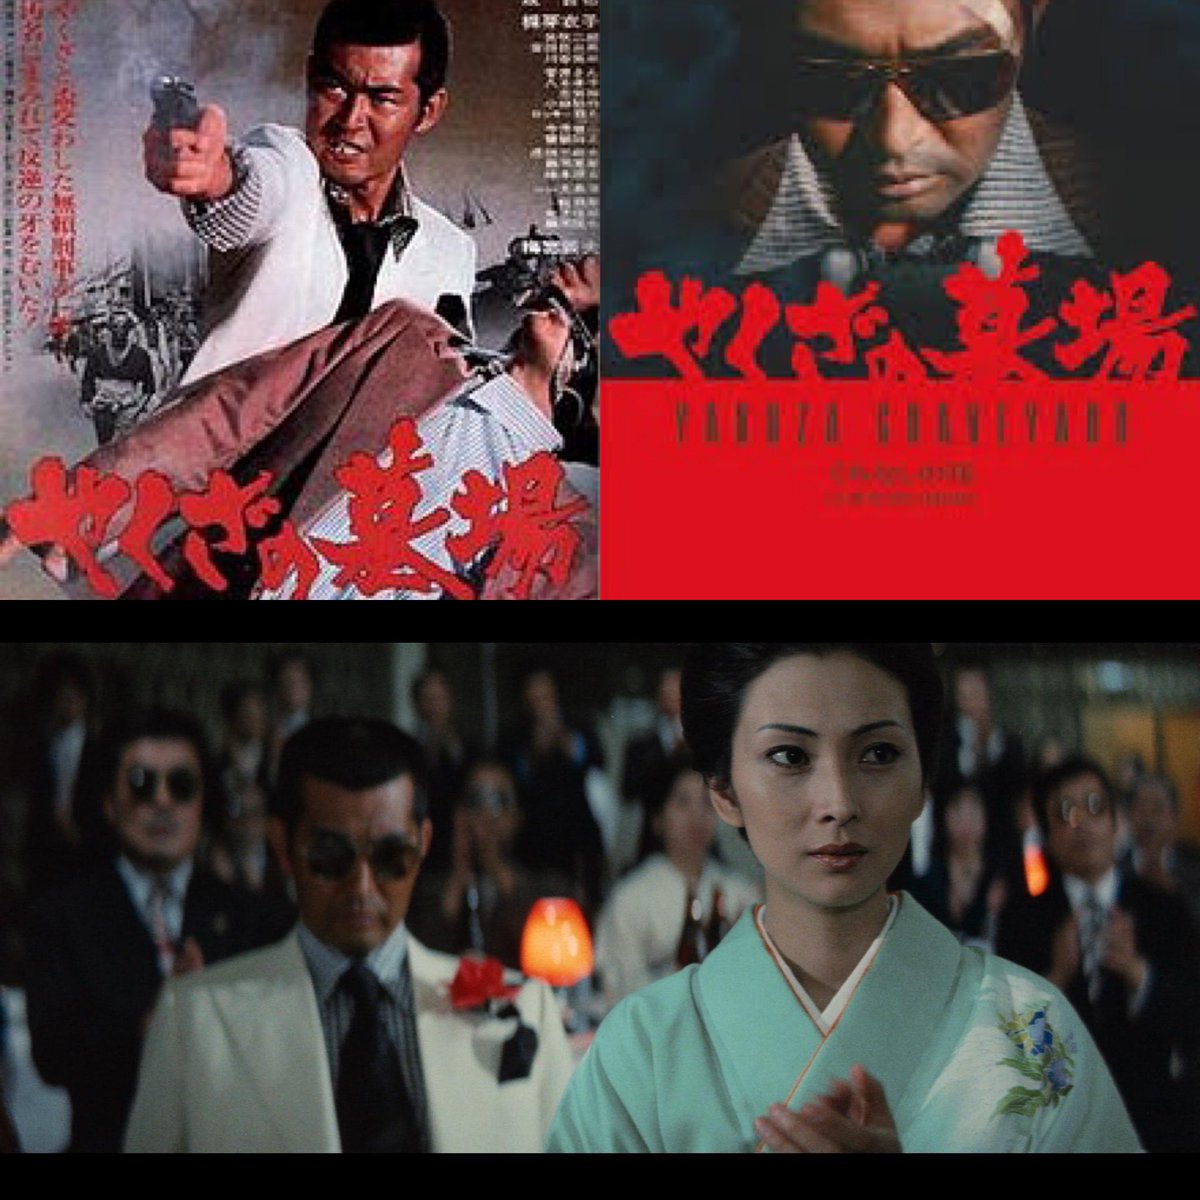 Not the usual way to spend my Sunday morning, but it was definitely time well speak. Yakuza Graveyard was fantastic. Thank you @FilmsRadiance for introducing me to this cinematic great.

#cinepile #yakuzafilm #japanesecinema #moviebuff #boutiquebluray